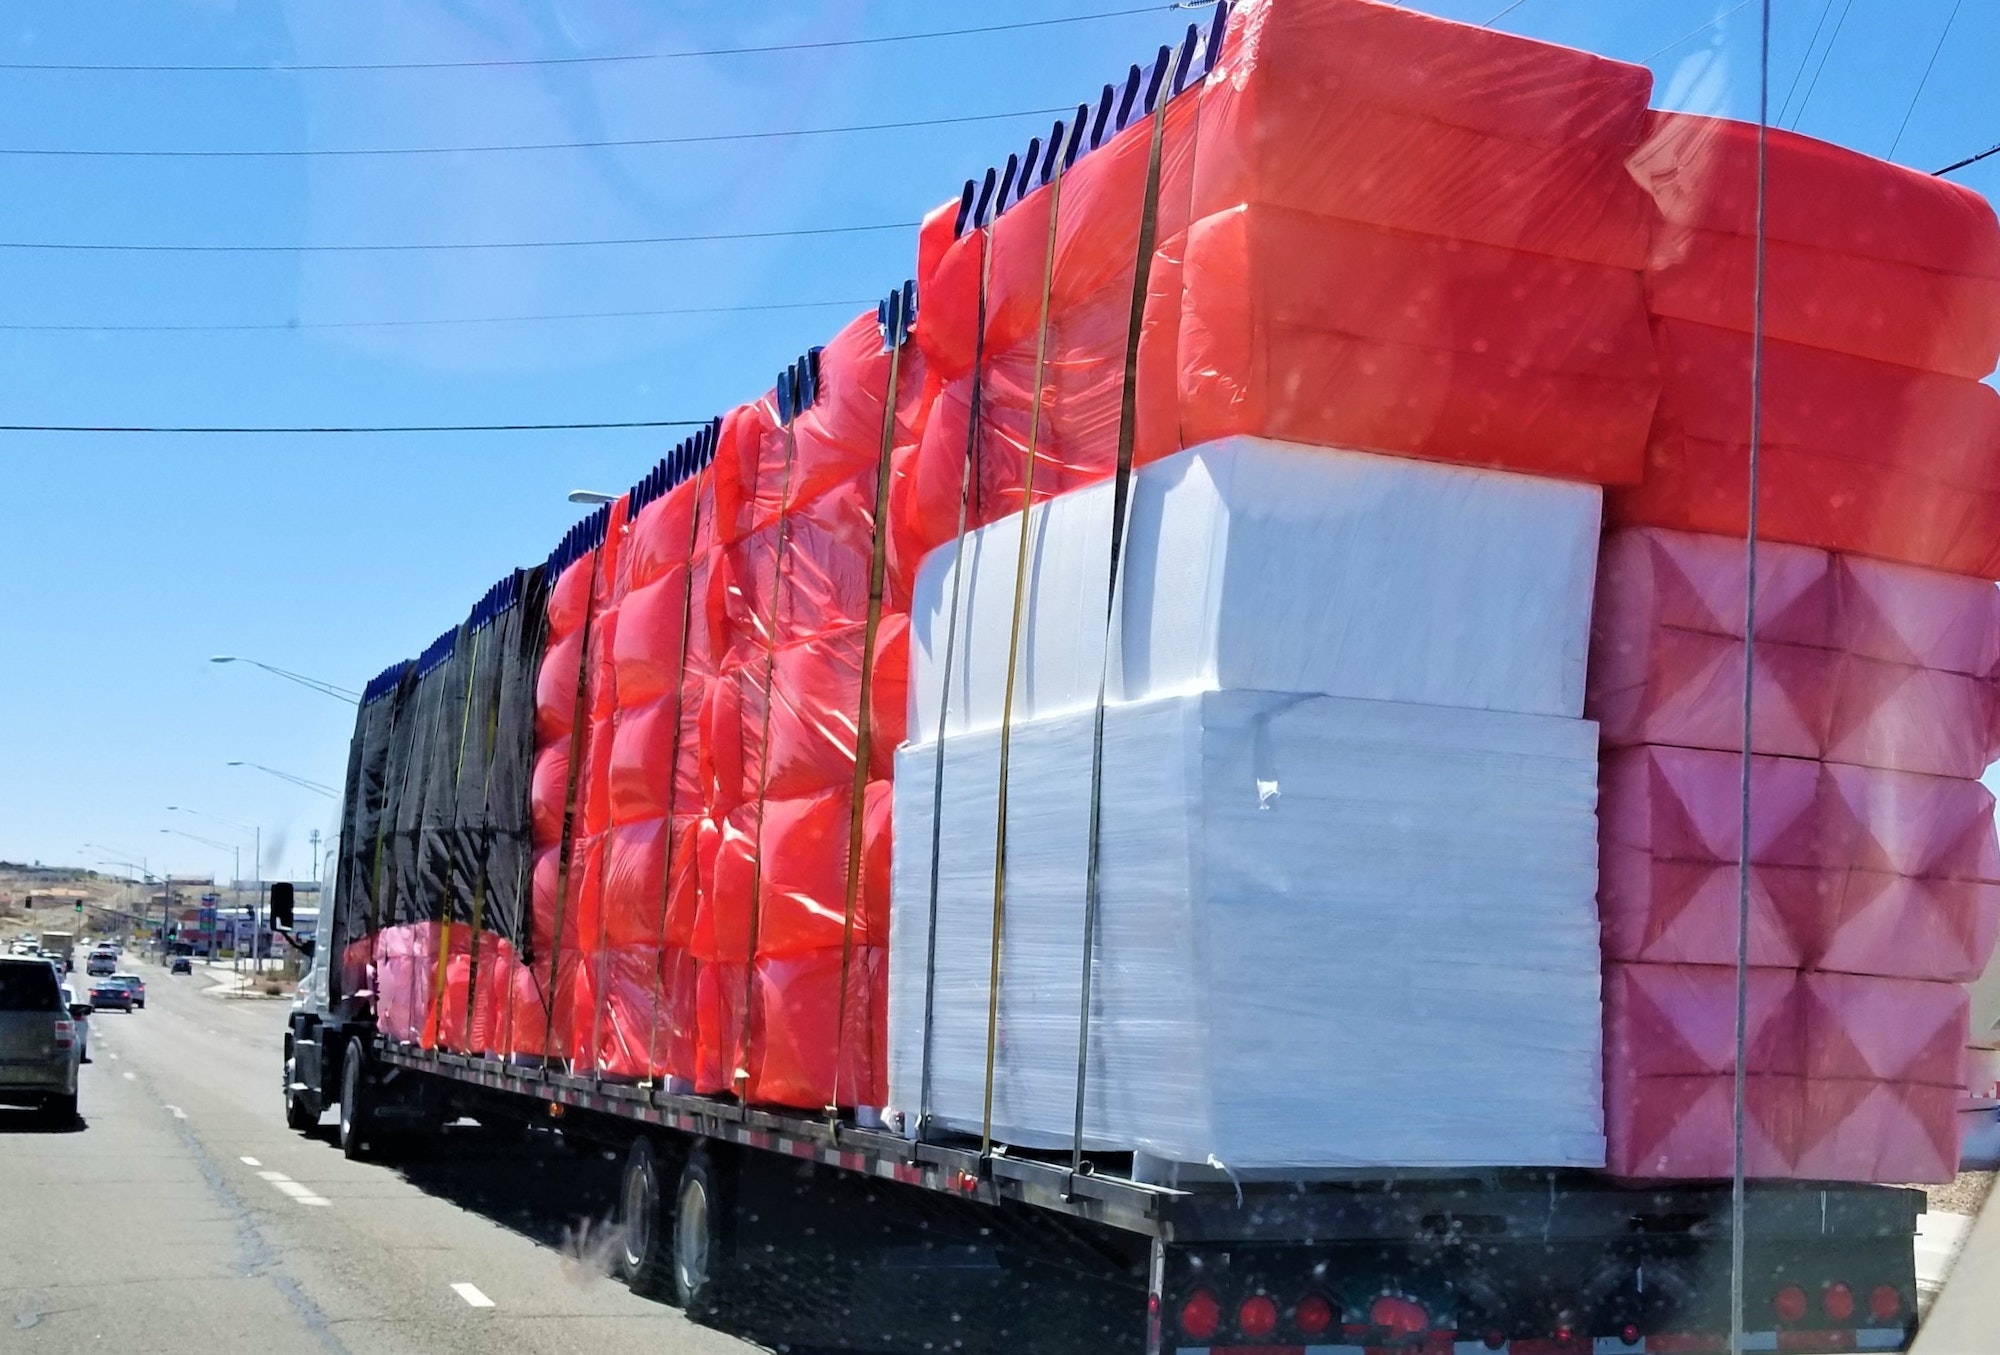 Big Rig Semi Truck Hauling a Flat Bed Filled with Plastic Covered Merchandise!